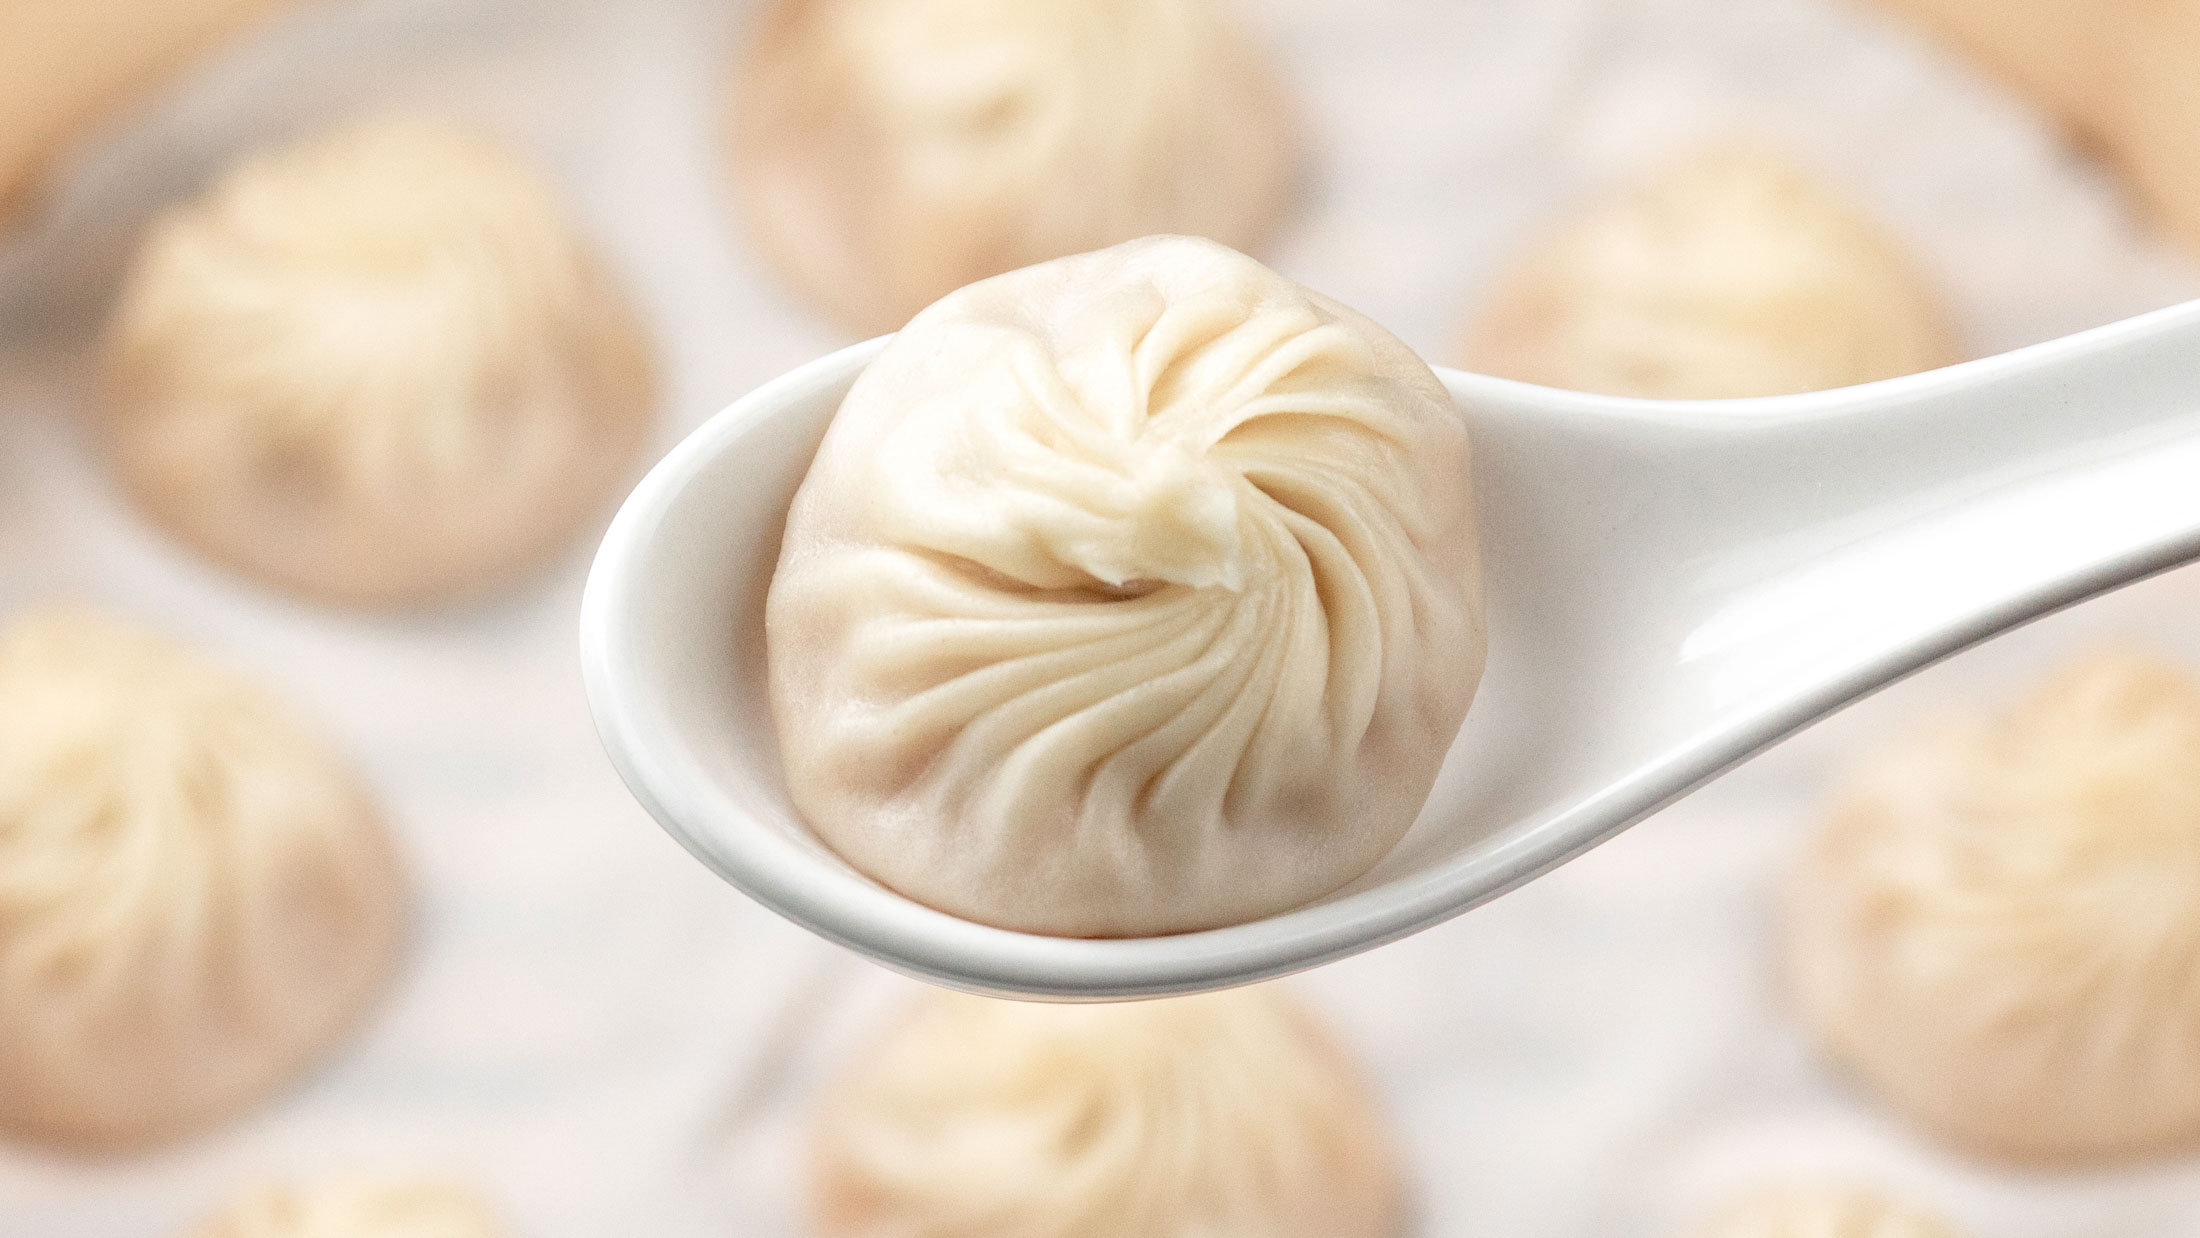 When Din Tai Fung opens its doors this spring, it will exponentially increase the number of soup dumplings in Manhattan.